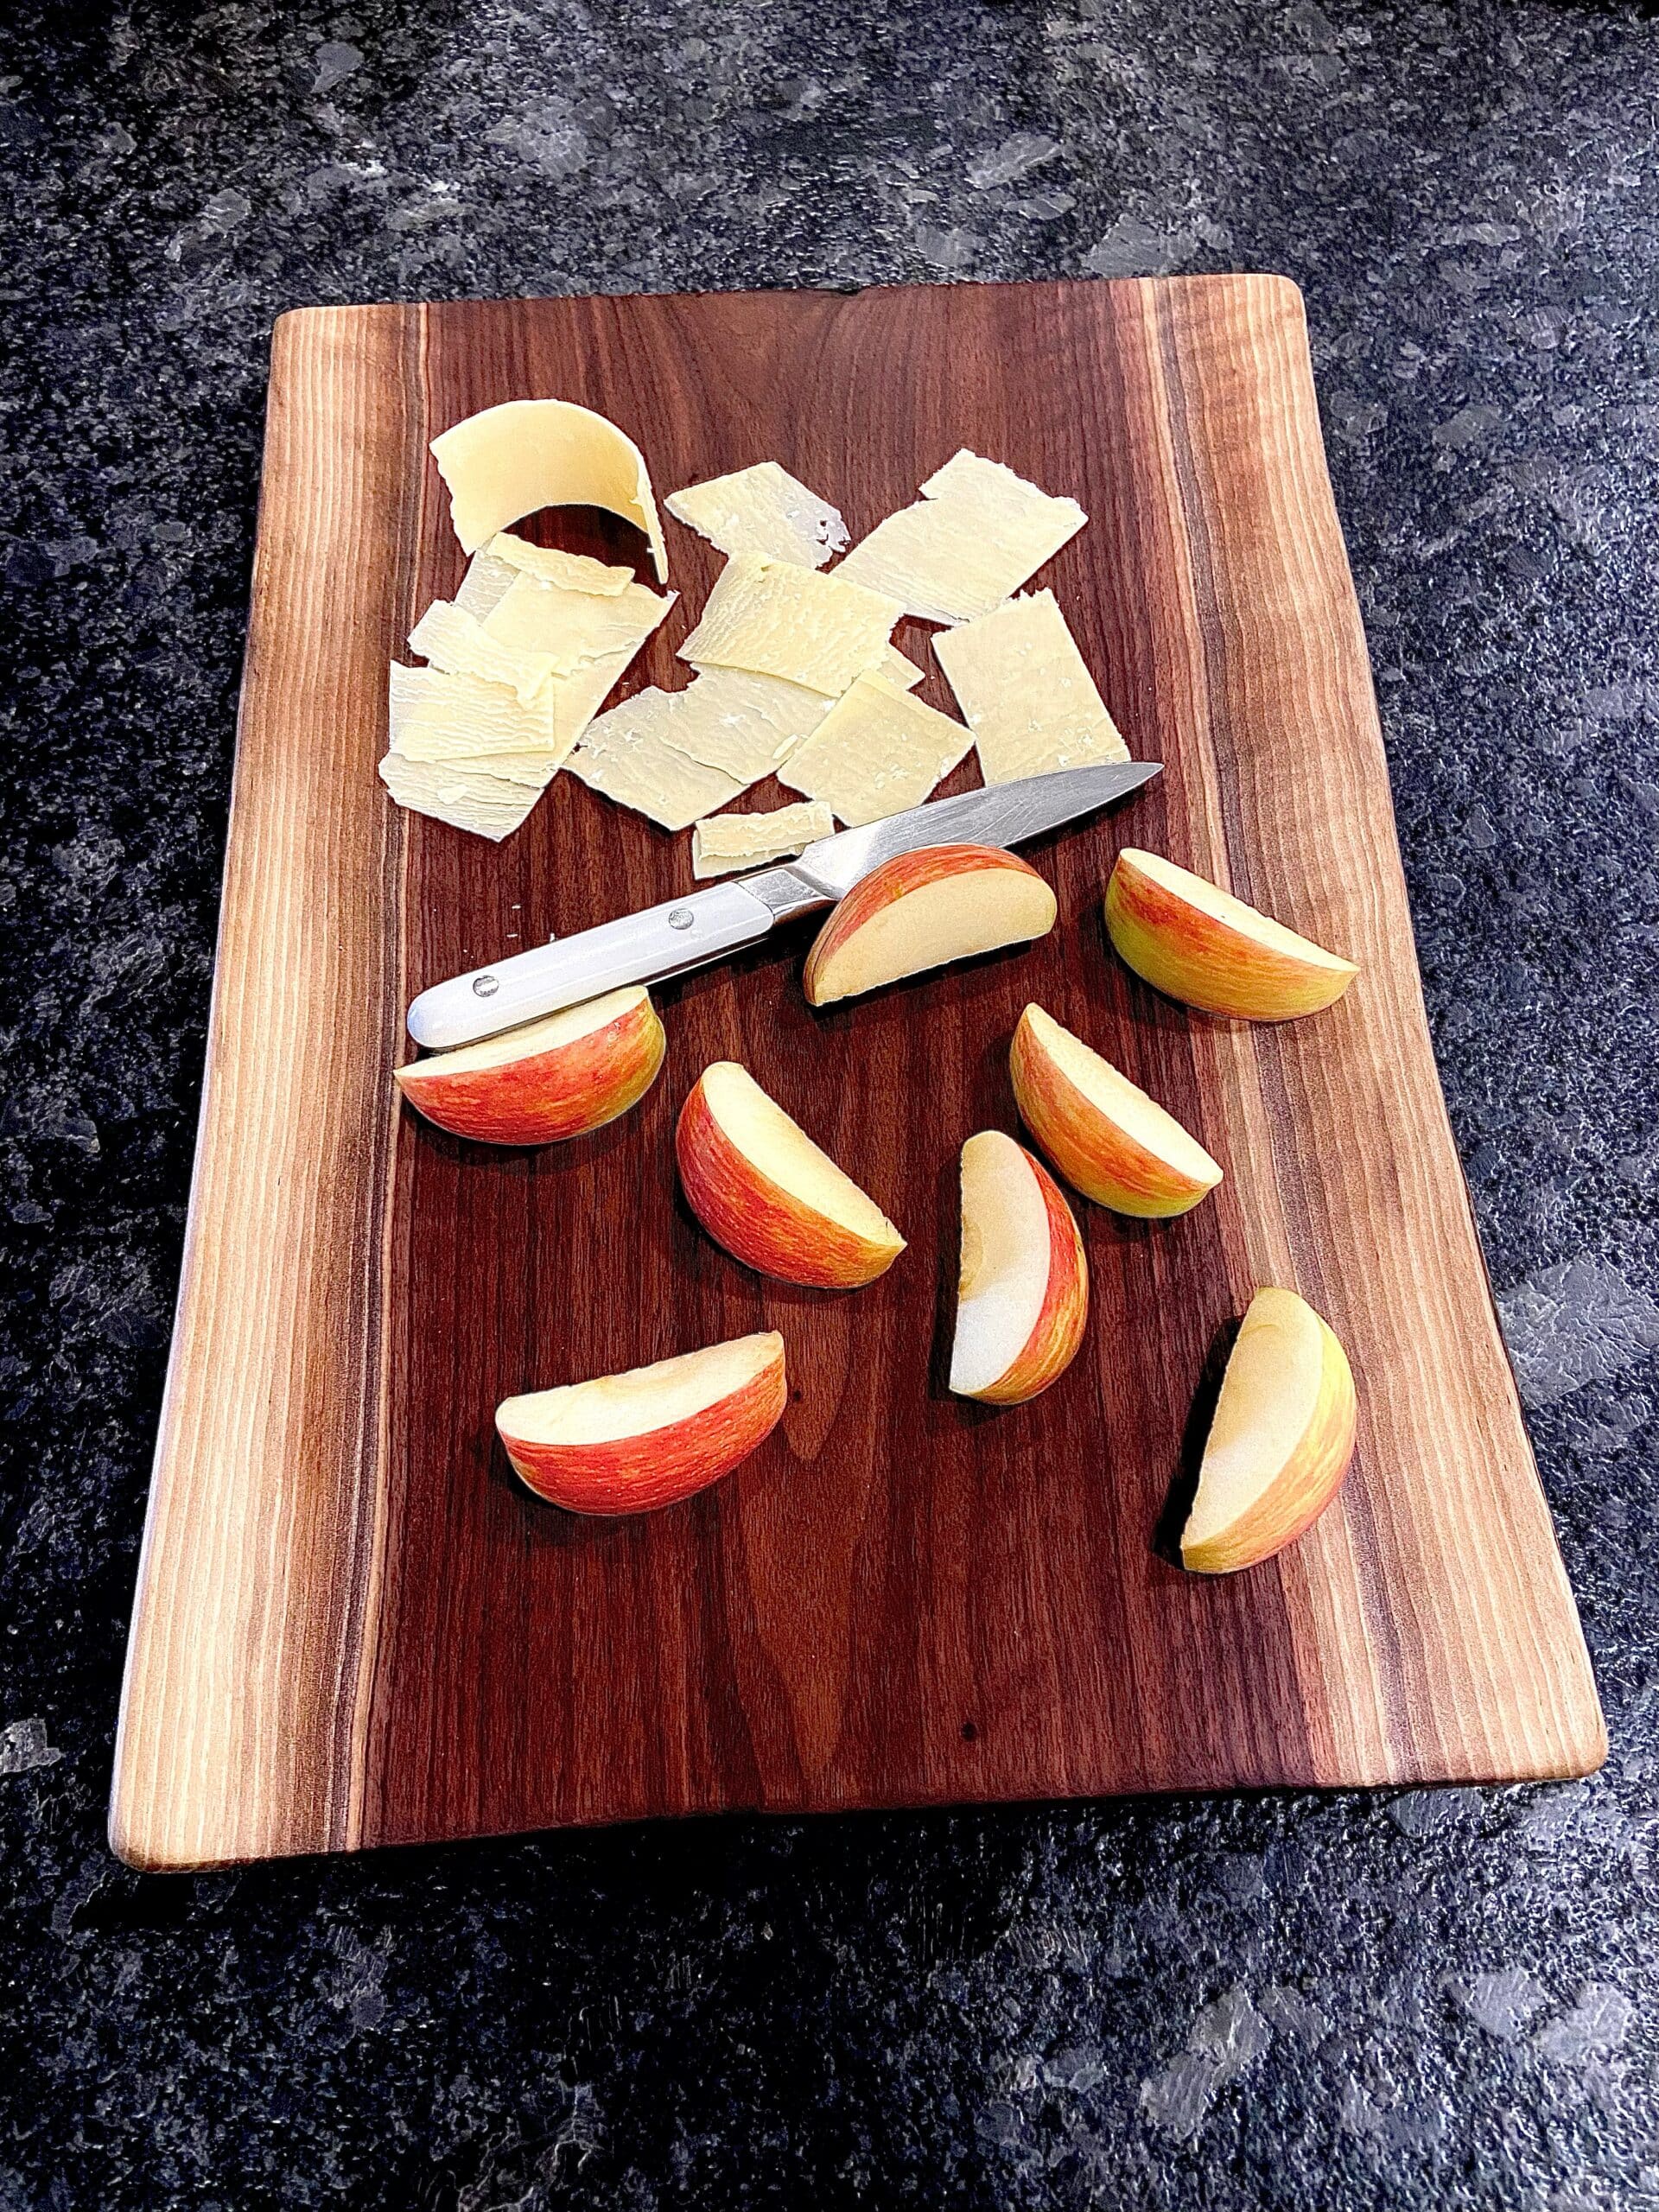 wooden non-toxic cutting board with apples and cheese